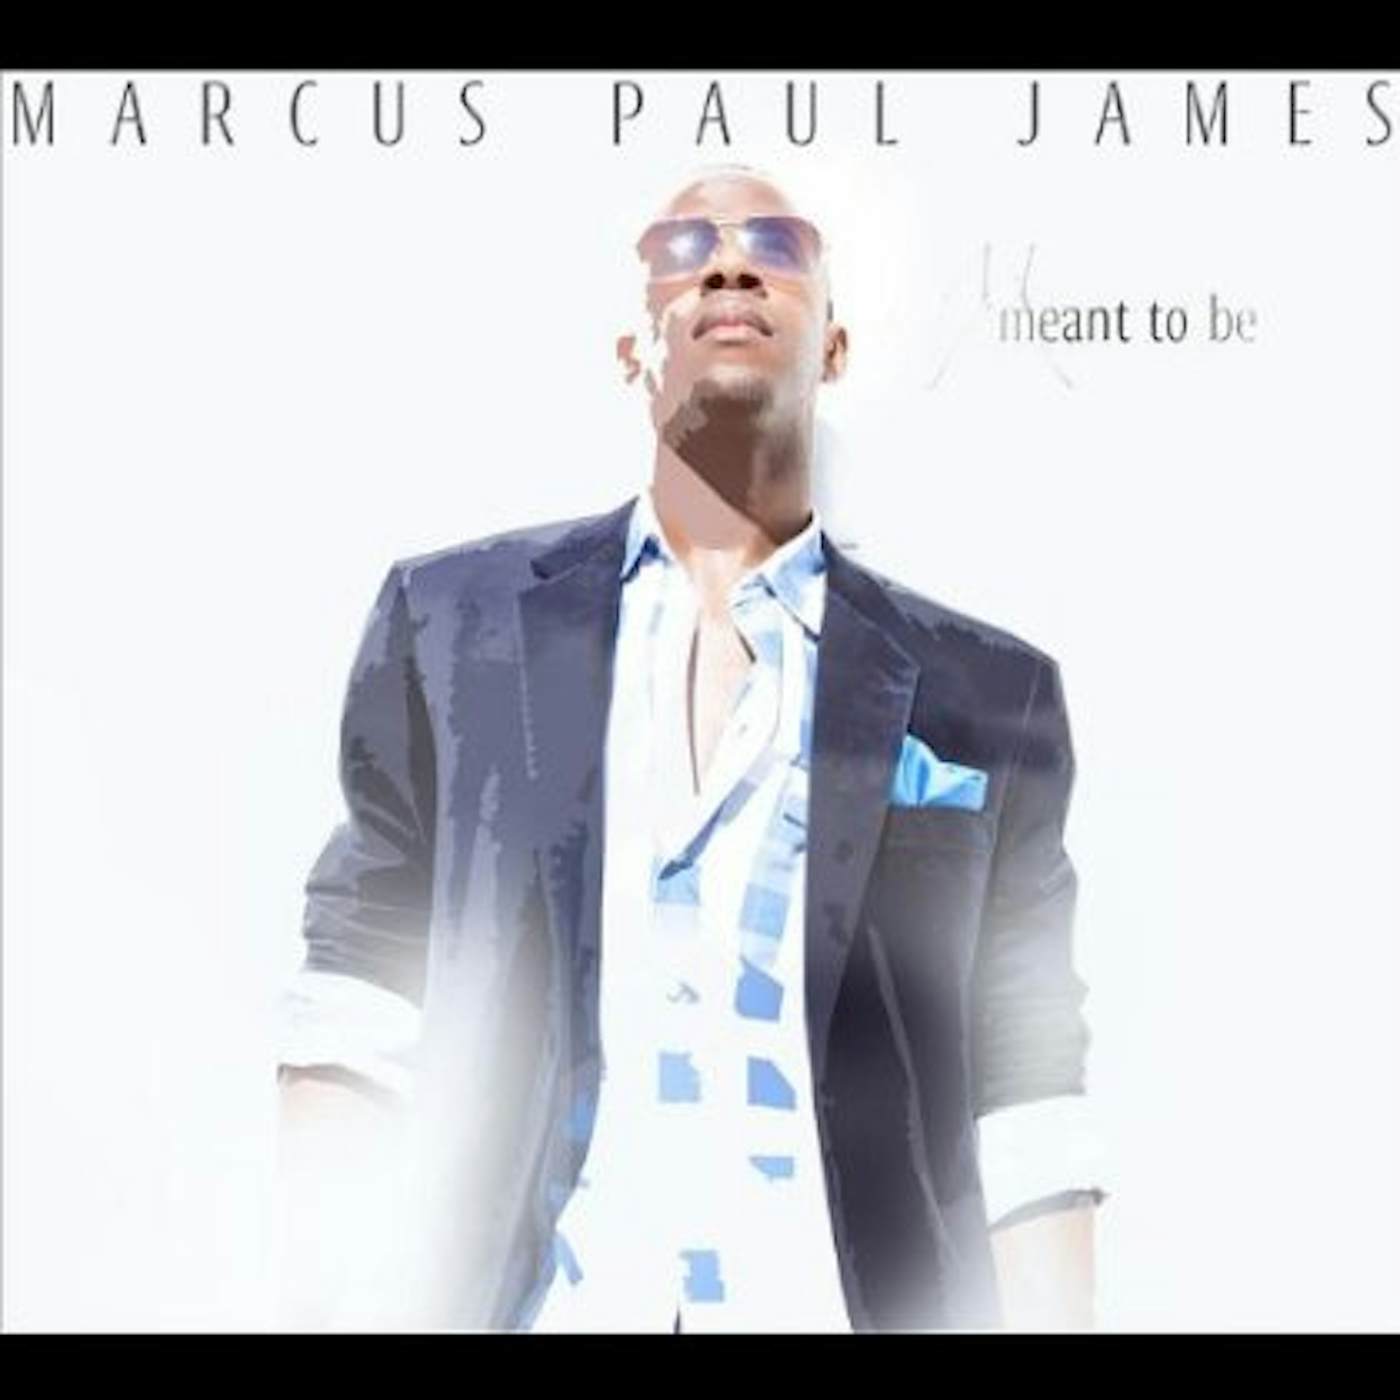 Marcus Paul James MEANT TO BE CD